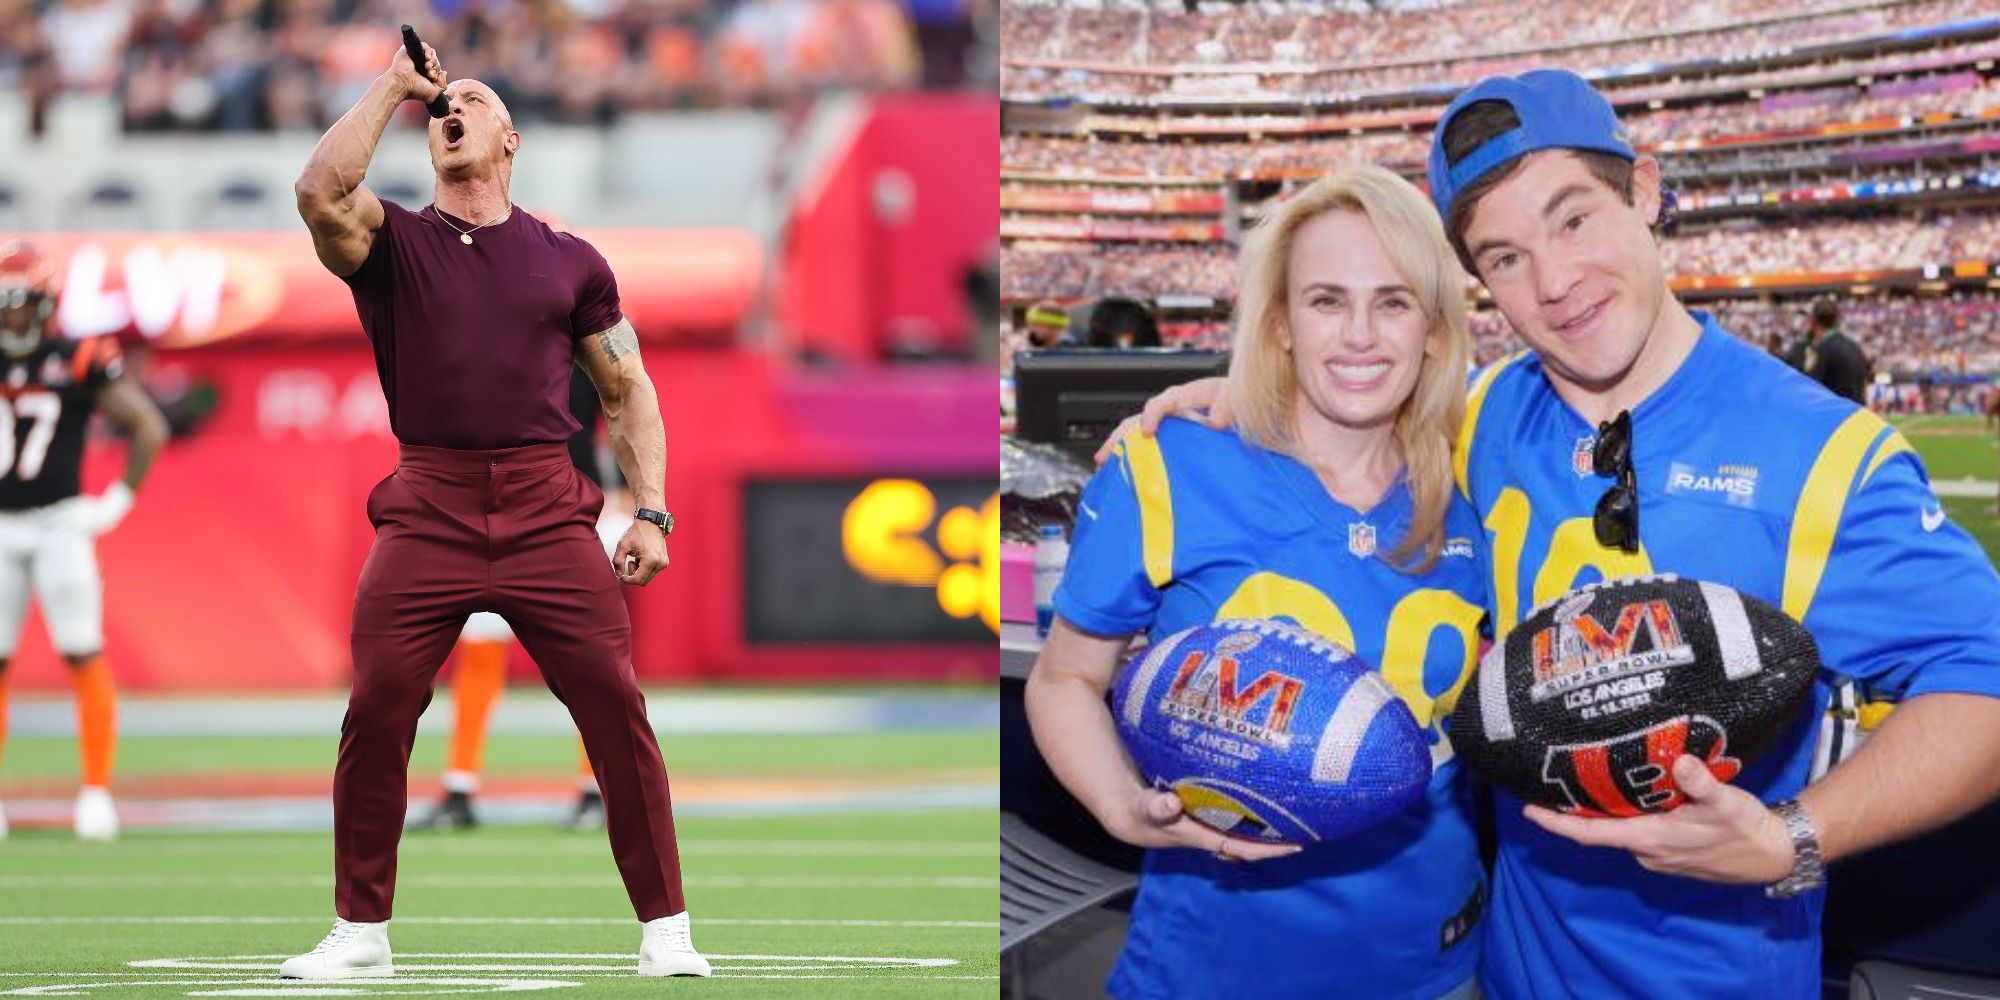 Split image showing Dwayne Johnson and Rebel Wilson and Adam Devine at the Super Bowl